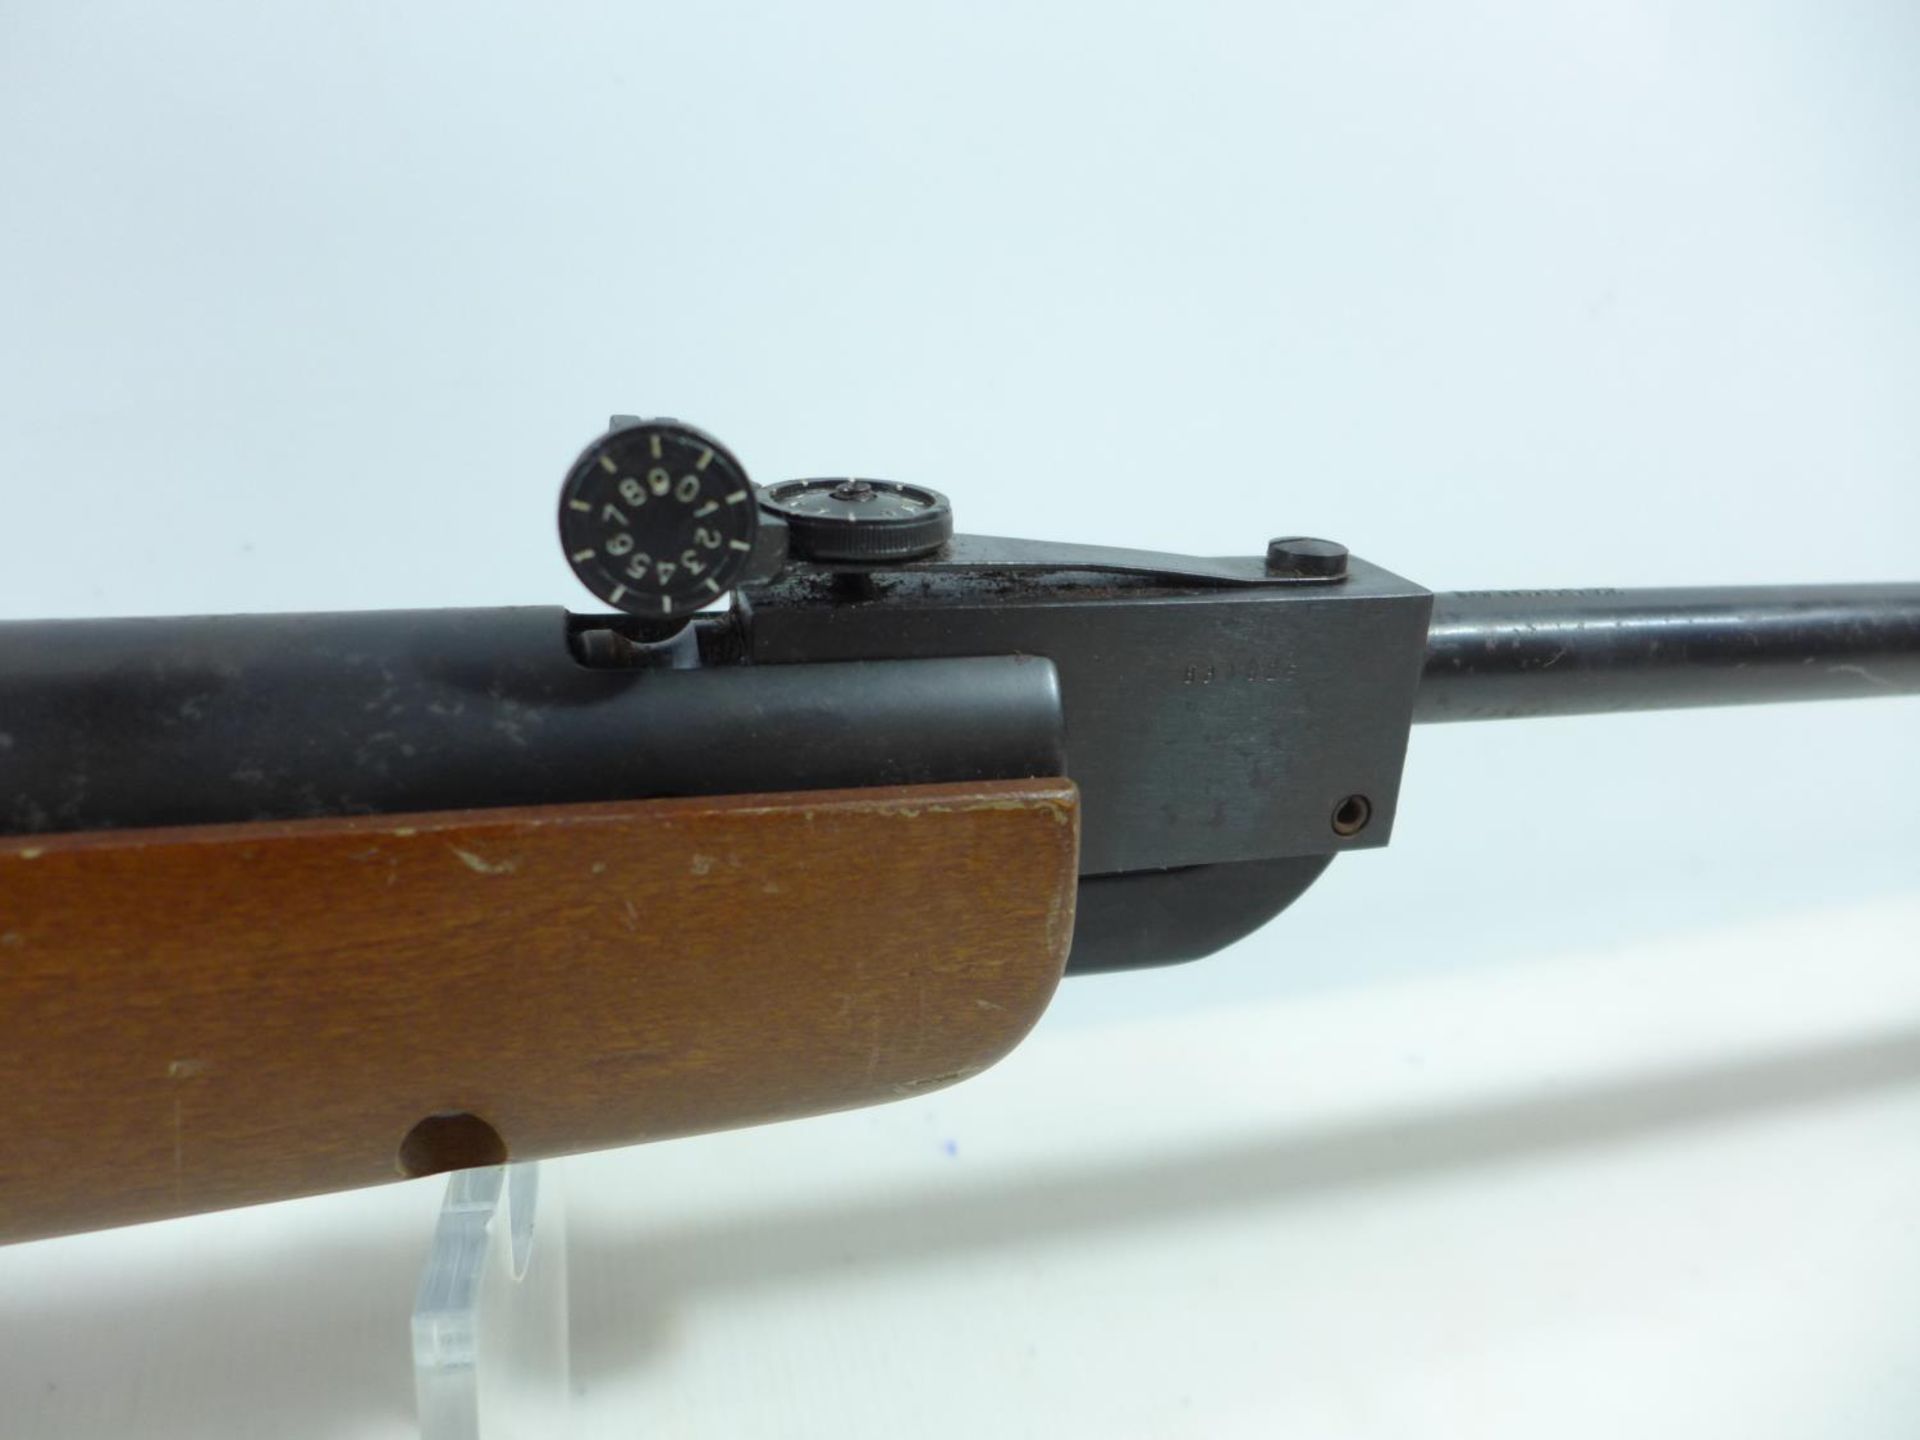 A WEBLEY AND SCOTT EXCEL .22 CALIBRE AIR RIFLE, 44CM BARREL, SERIAL NUMBER 831825, FITTED WITH - Image 2 of 7